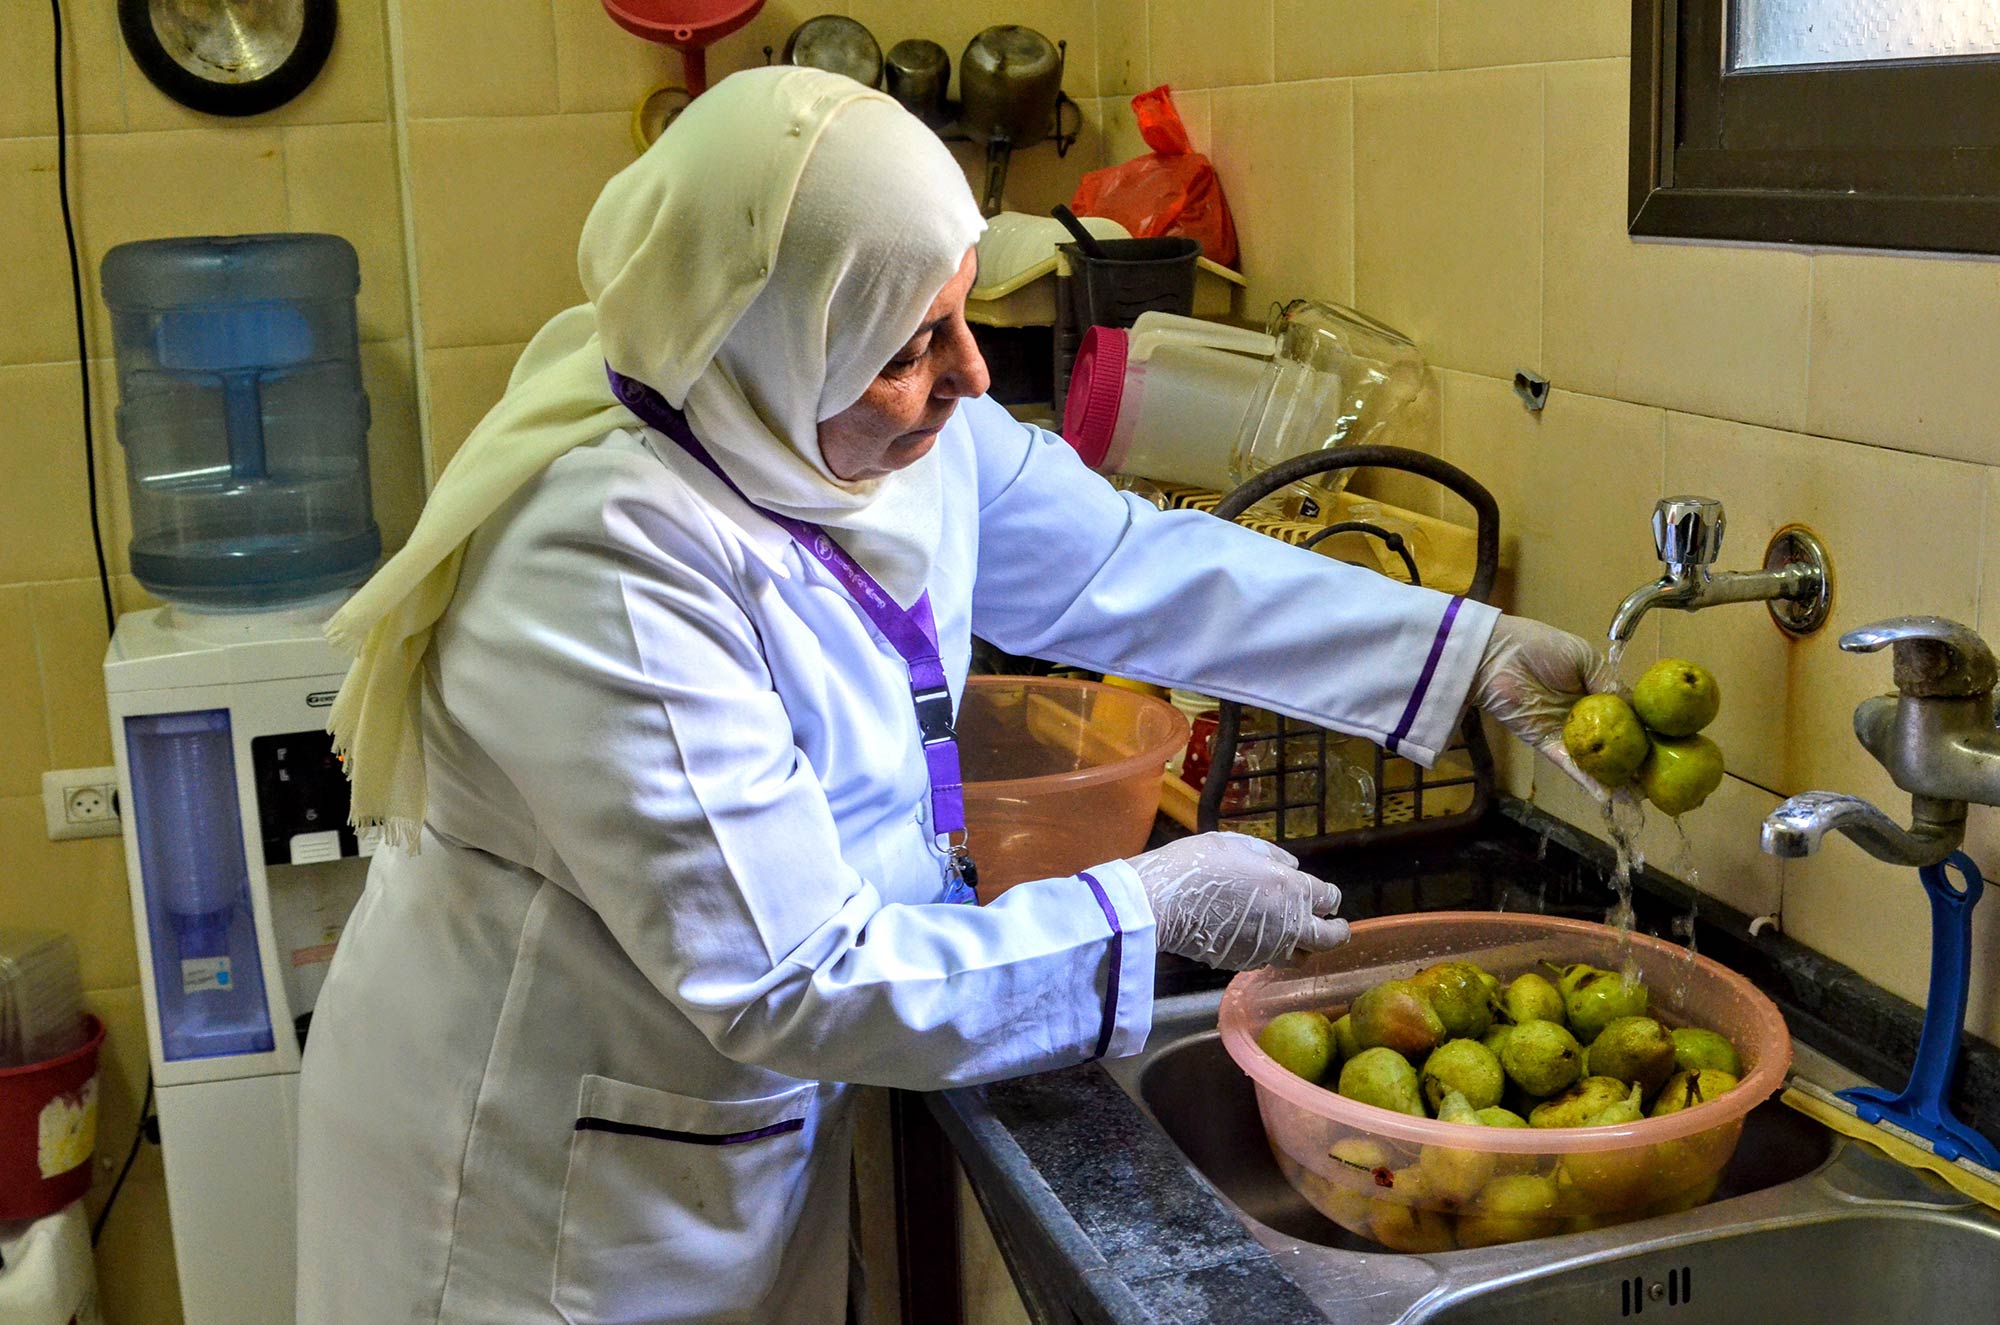 A staff member washes fruit in clean water to prepare a healthy meal for children in Gaza.